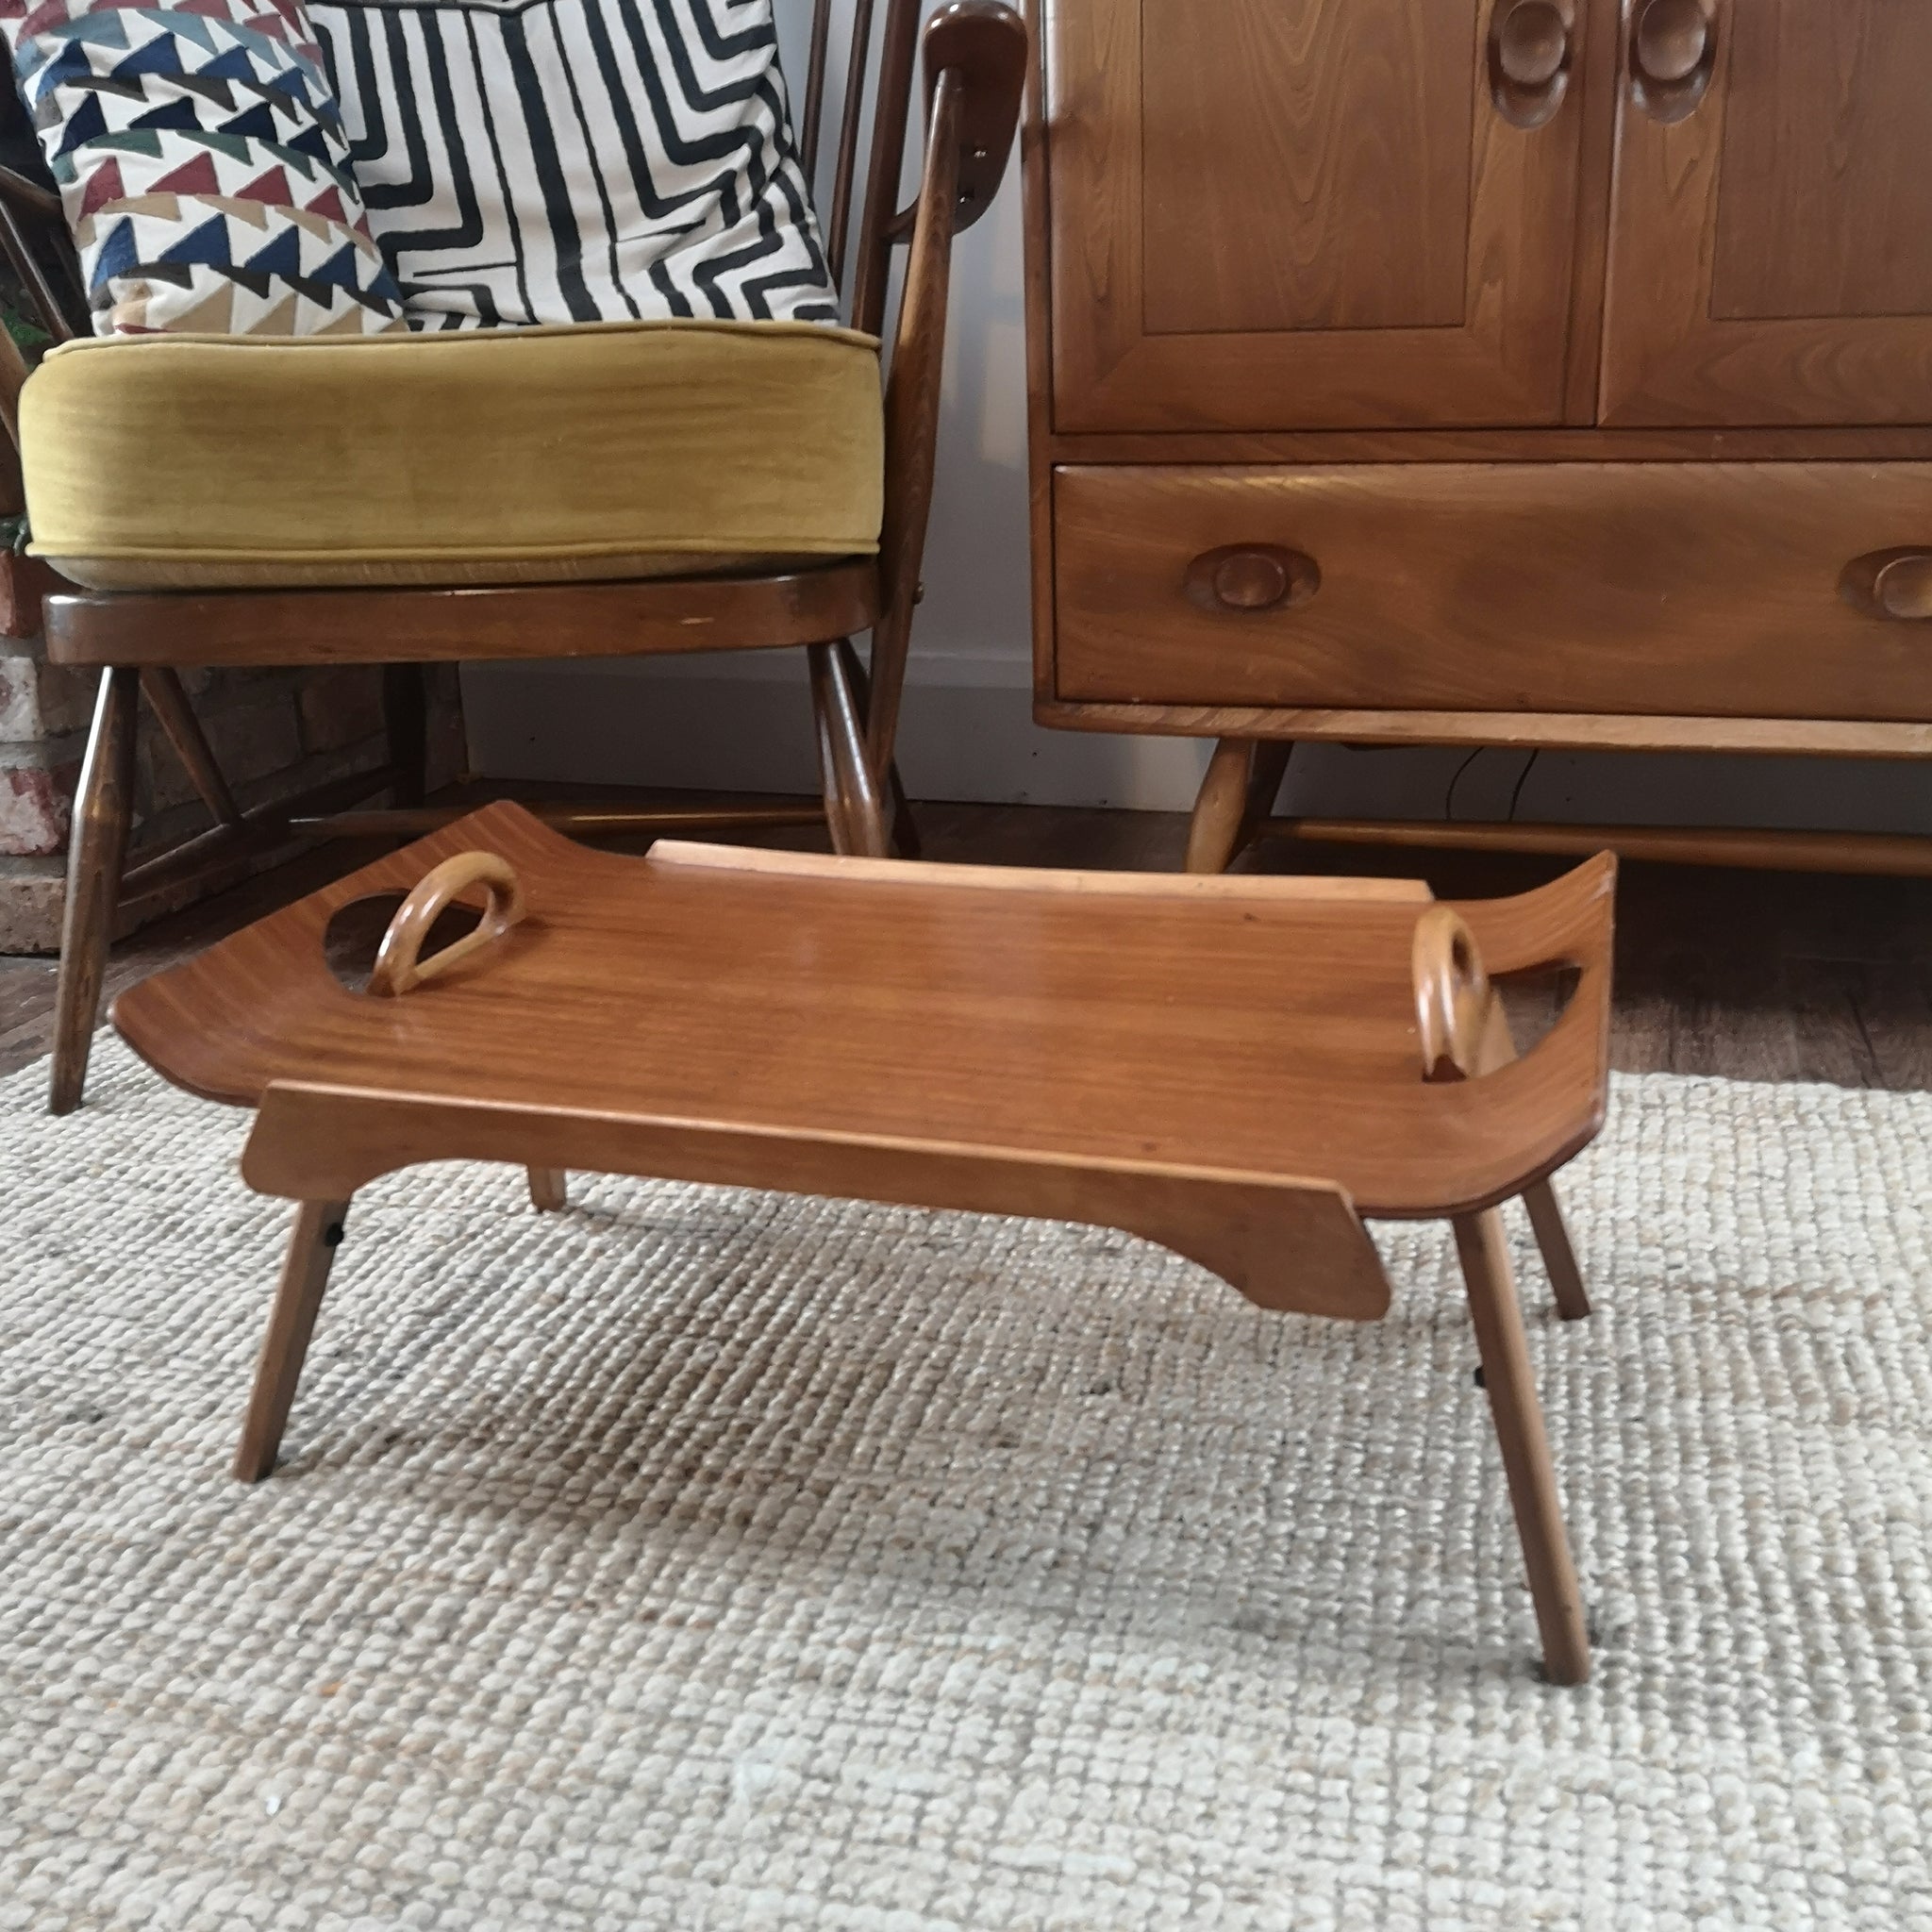 Vintage Mid-Century Fold Out Table Tray